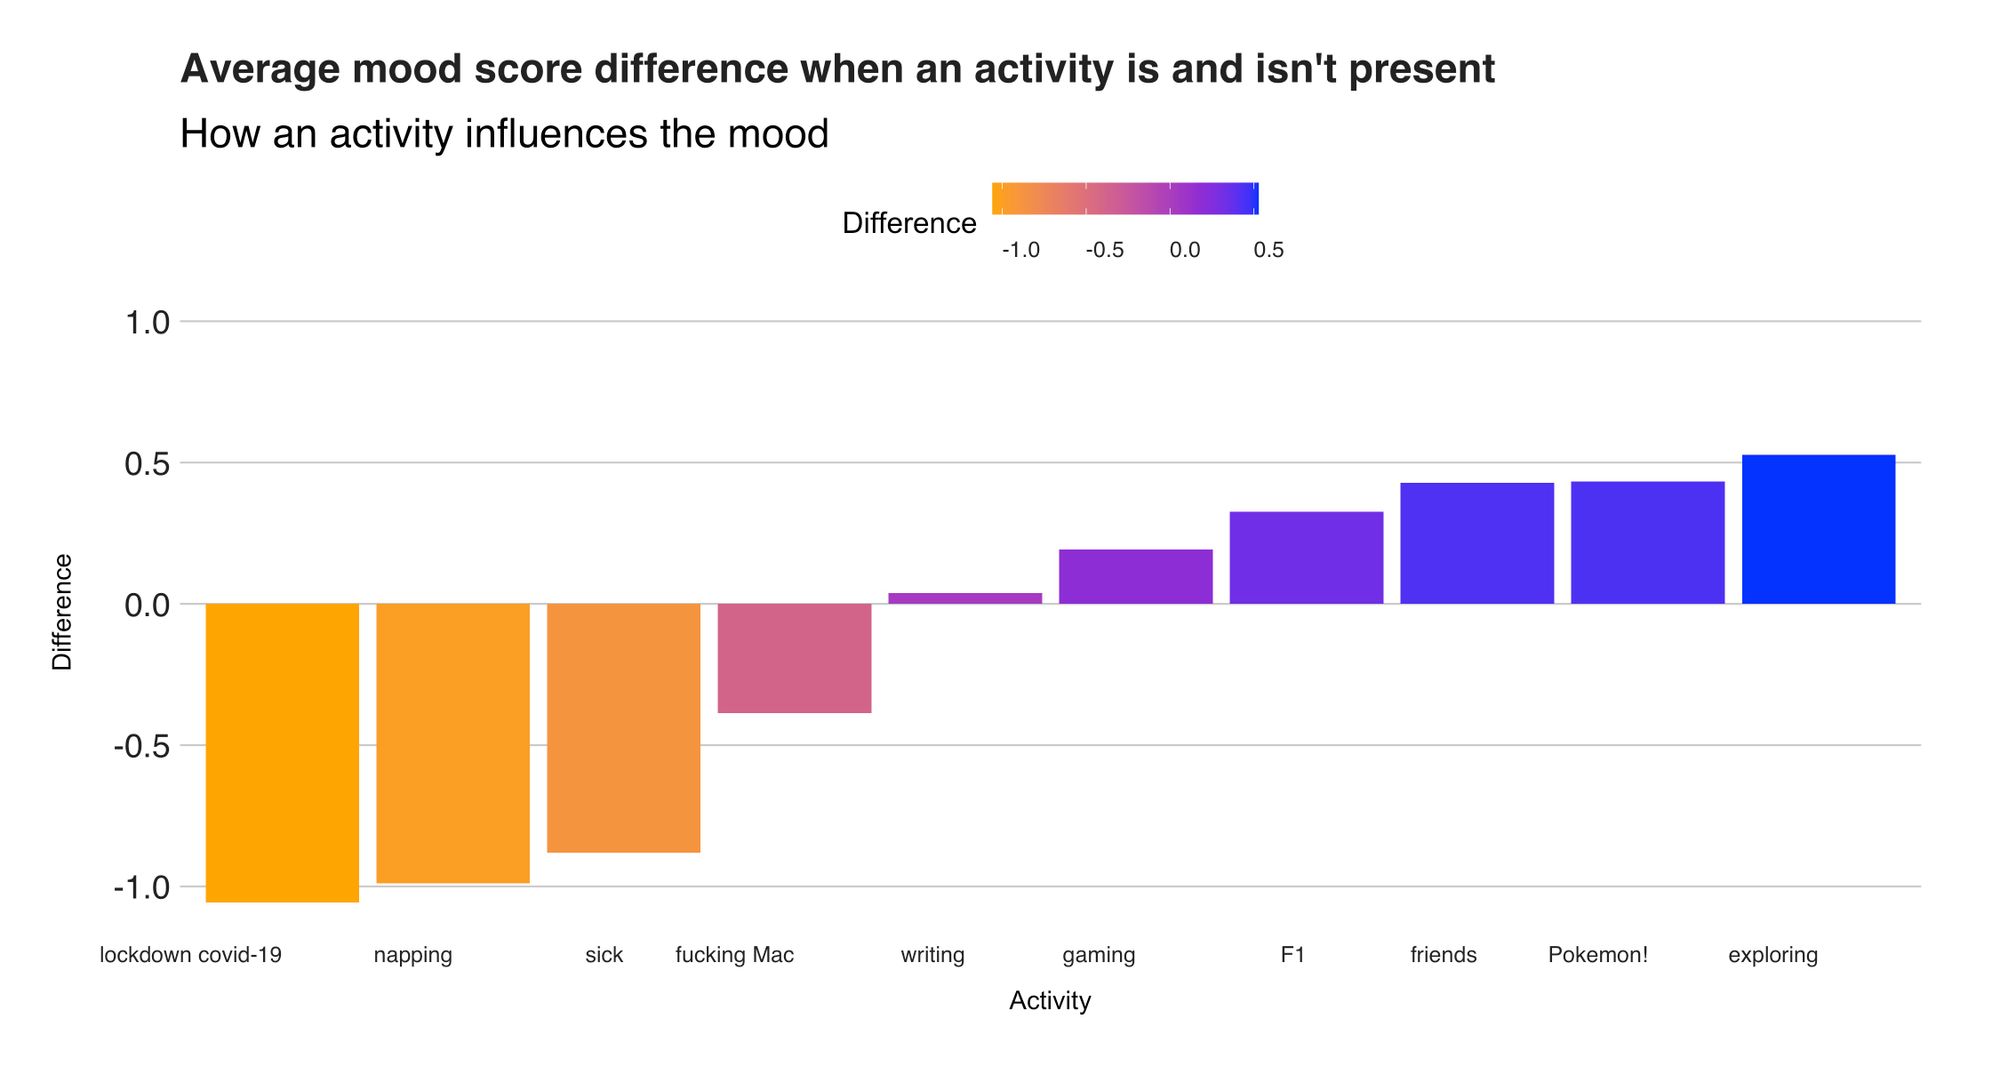 Figure 6: Average mood score difference when an activity is and isn't present.